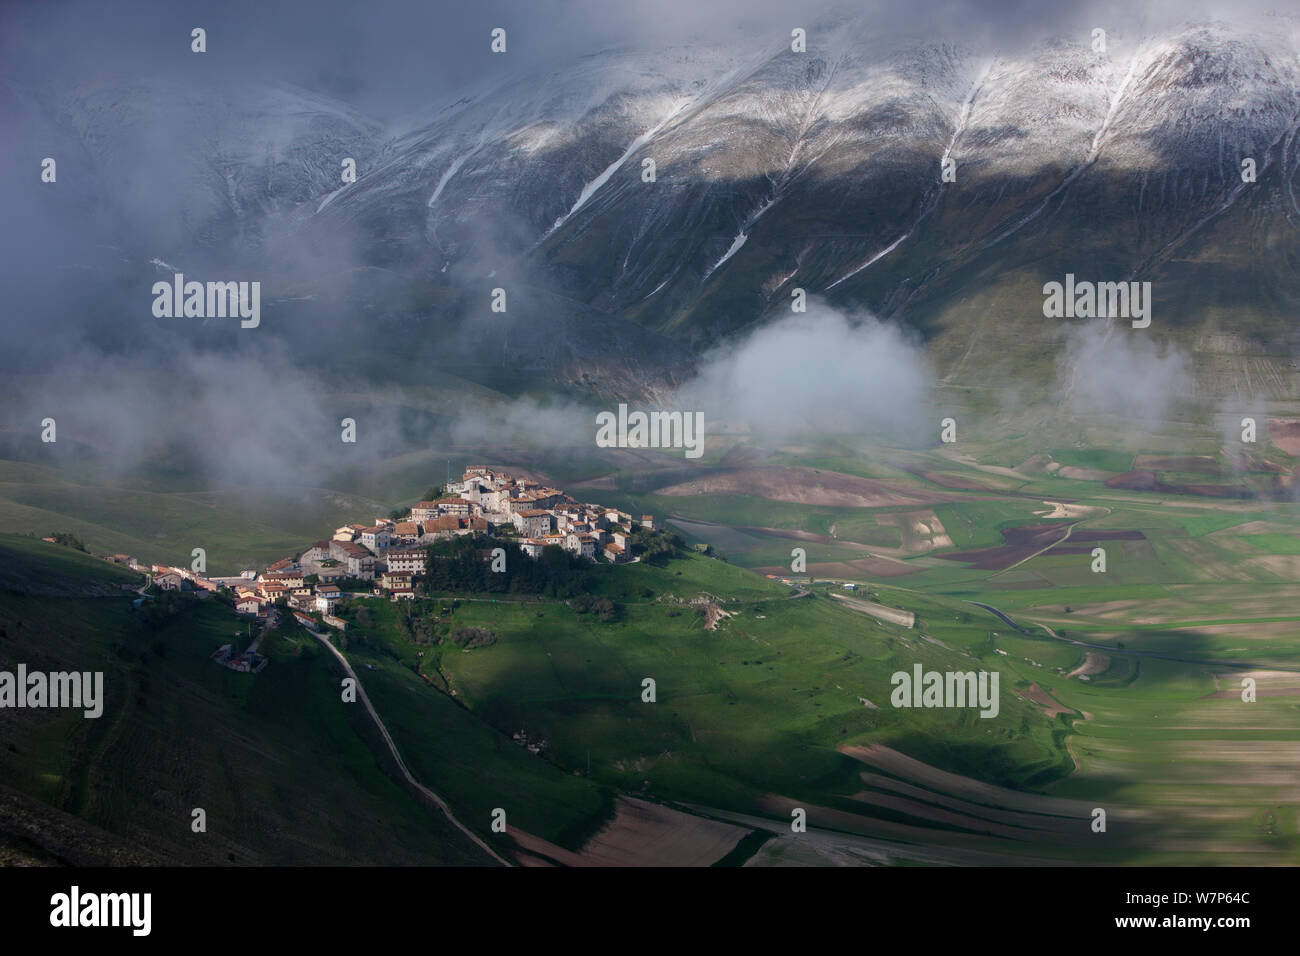 Looking down on Castelluccio and the Piano Grande, Monti Sibillini National Park, Umbria, Italy May 2012 Stock Photo